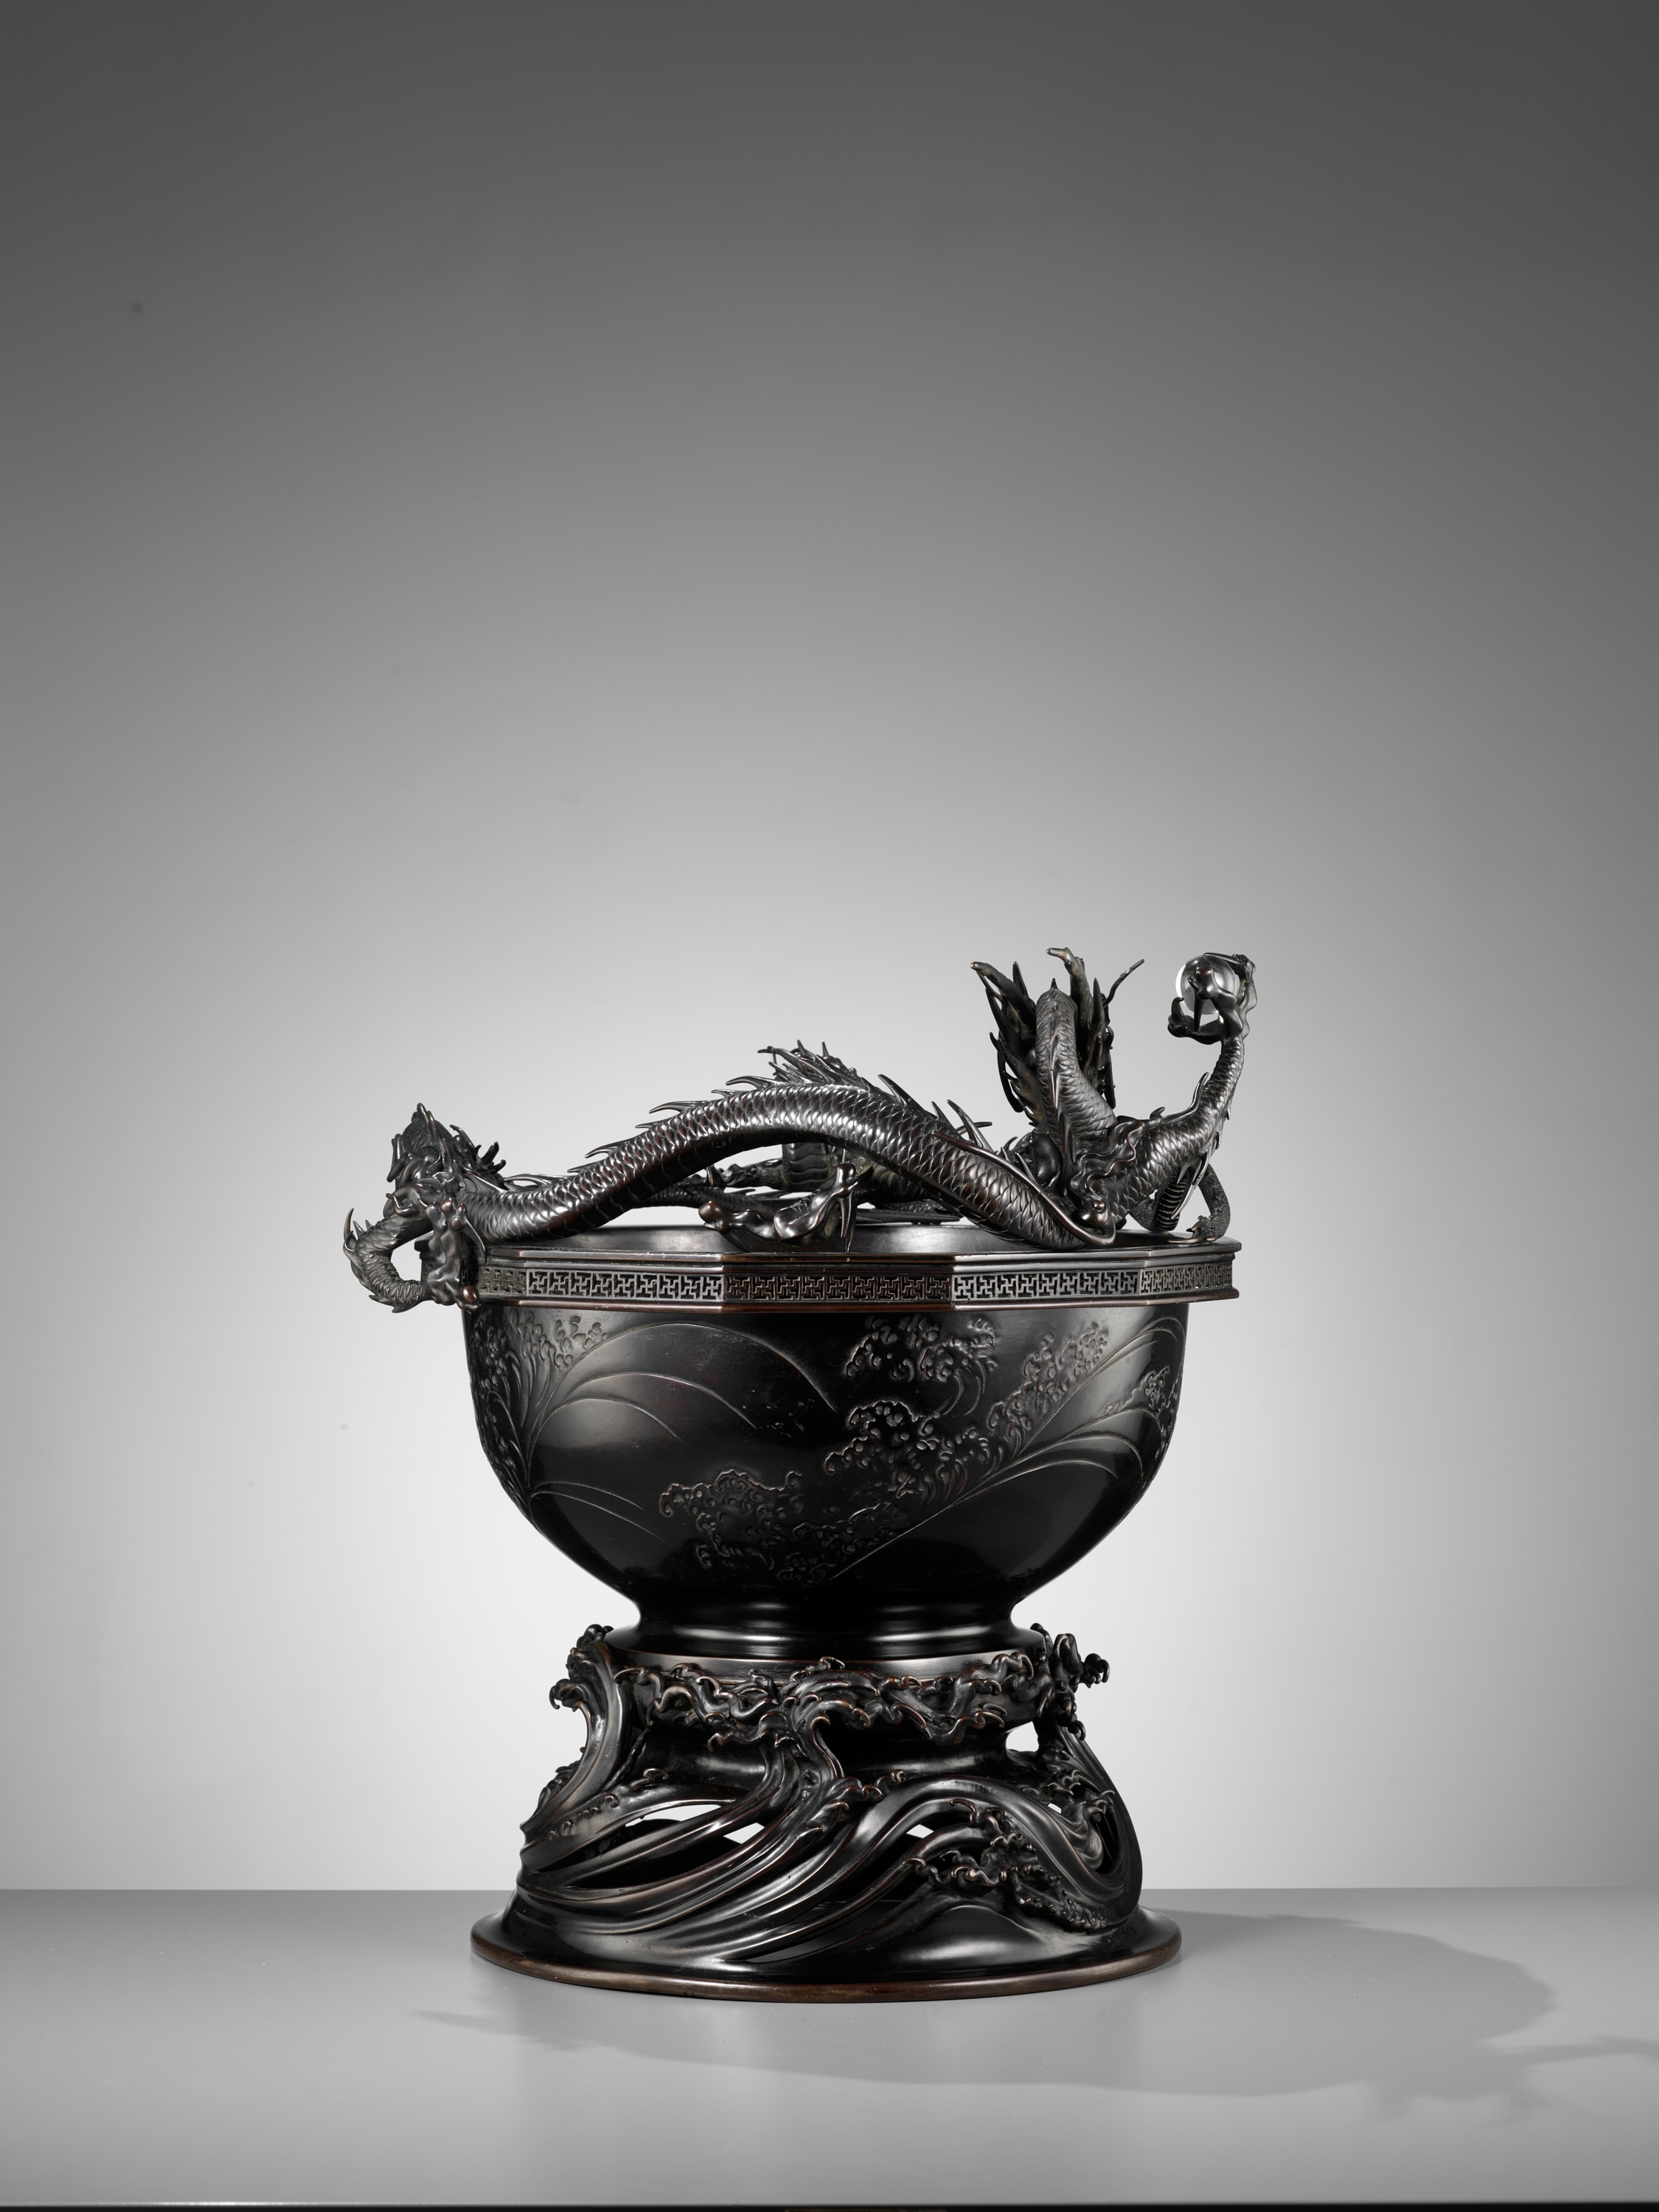 HIDEMITSU: A LARGE AND IMPRESSIVE BRONZE BOWL WITH TWO DRAGONS - Image 10 of 16